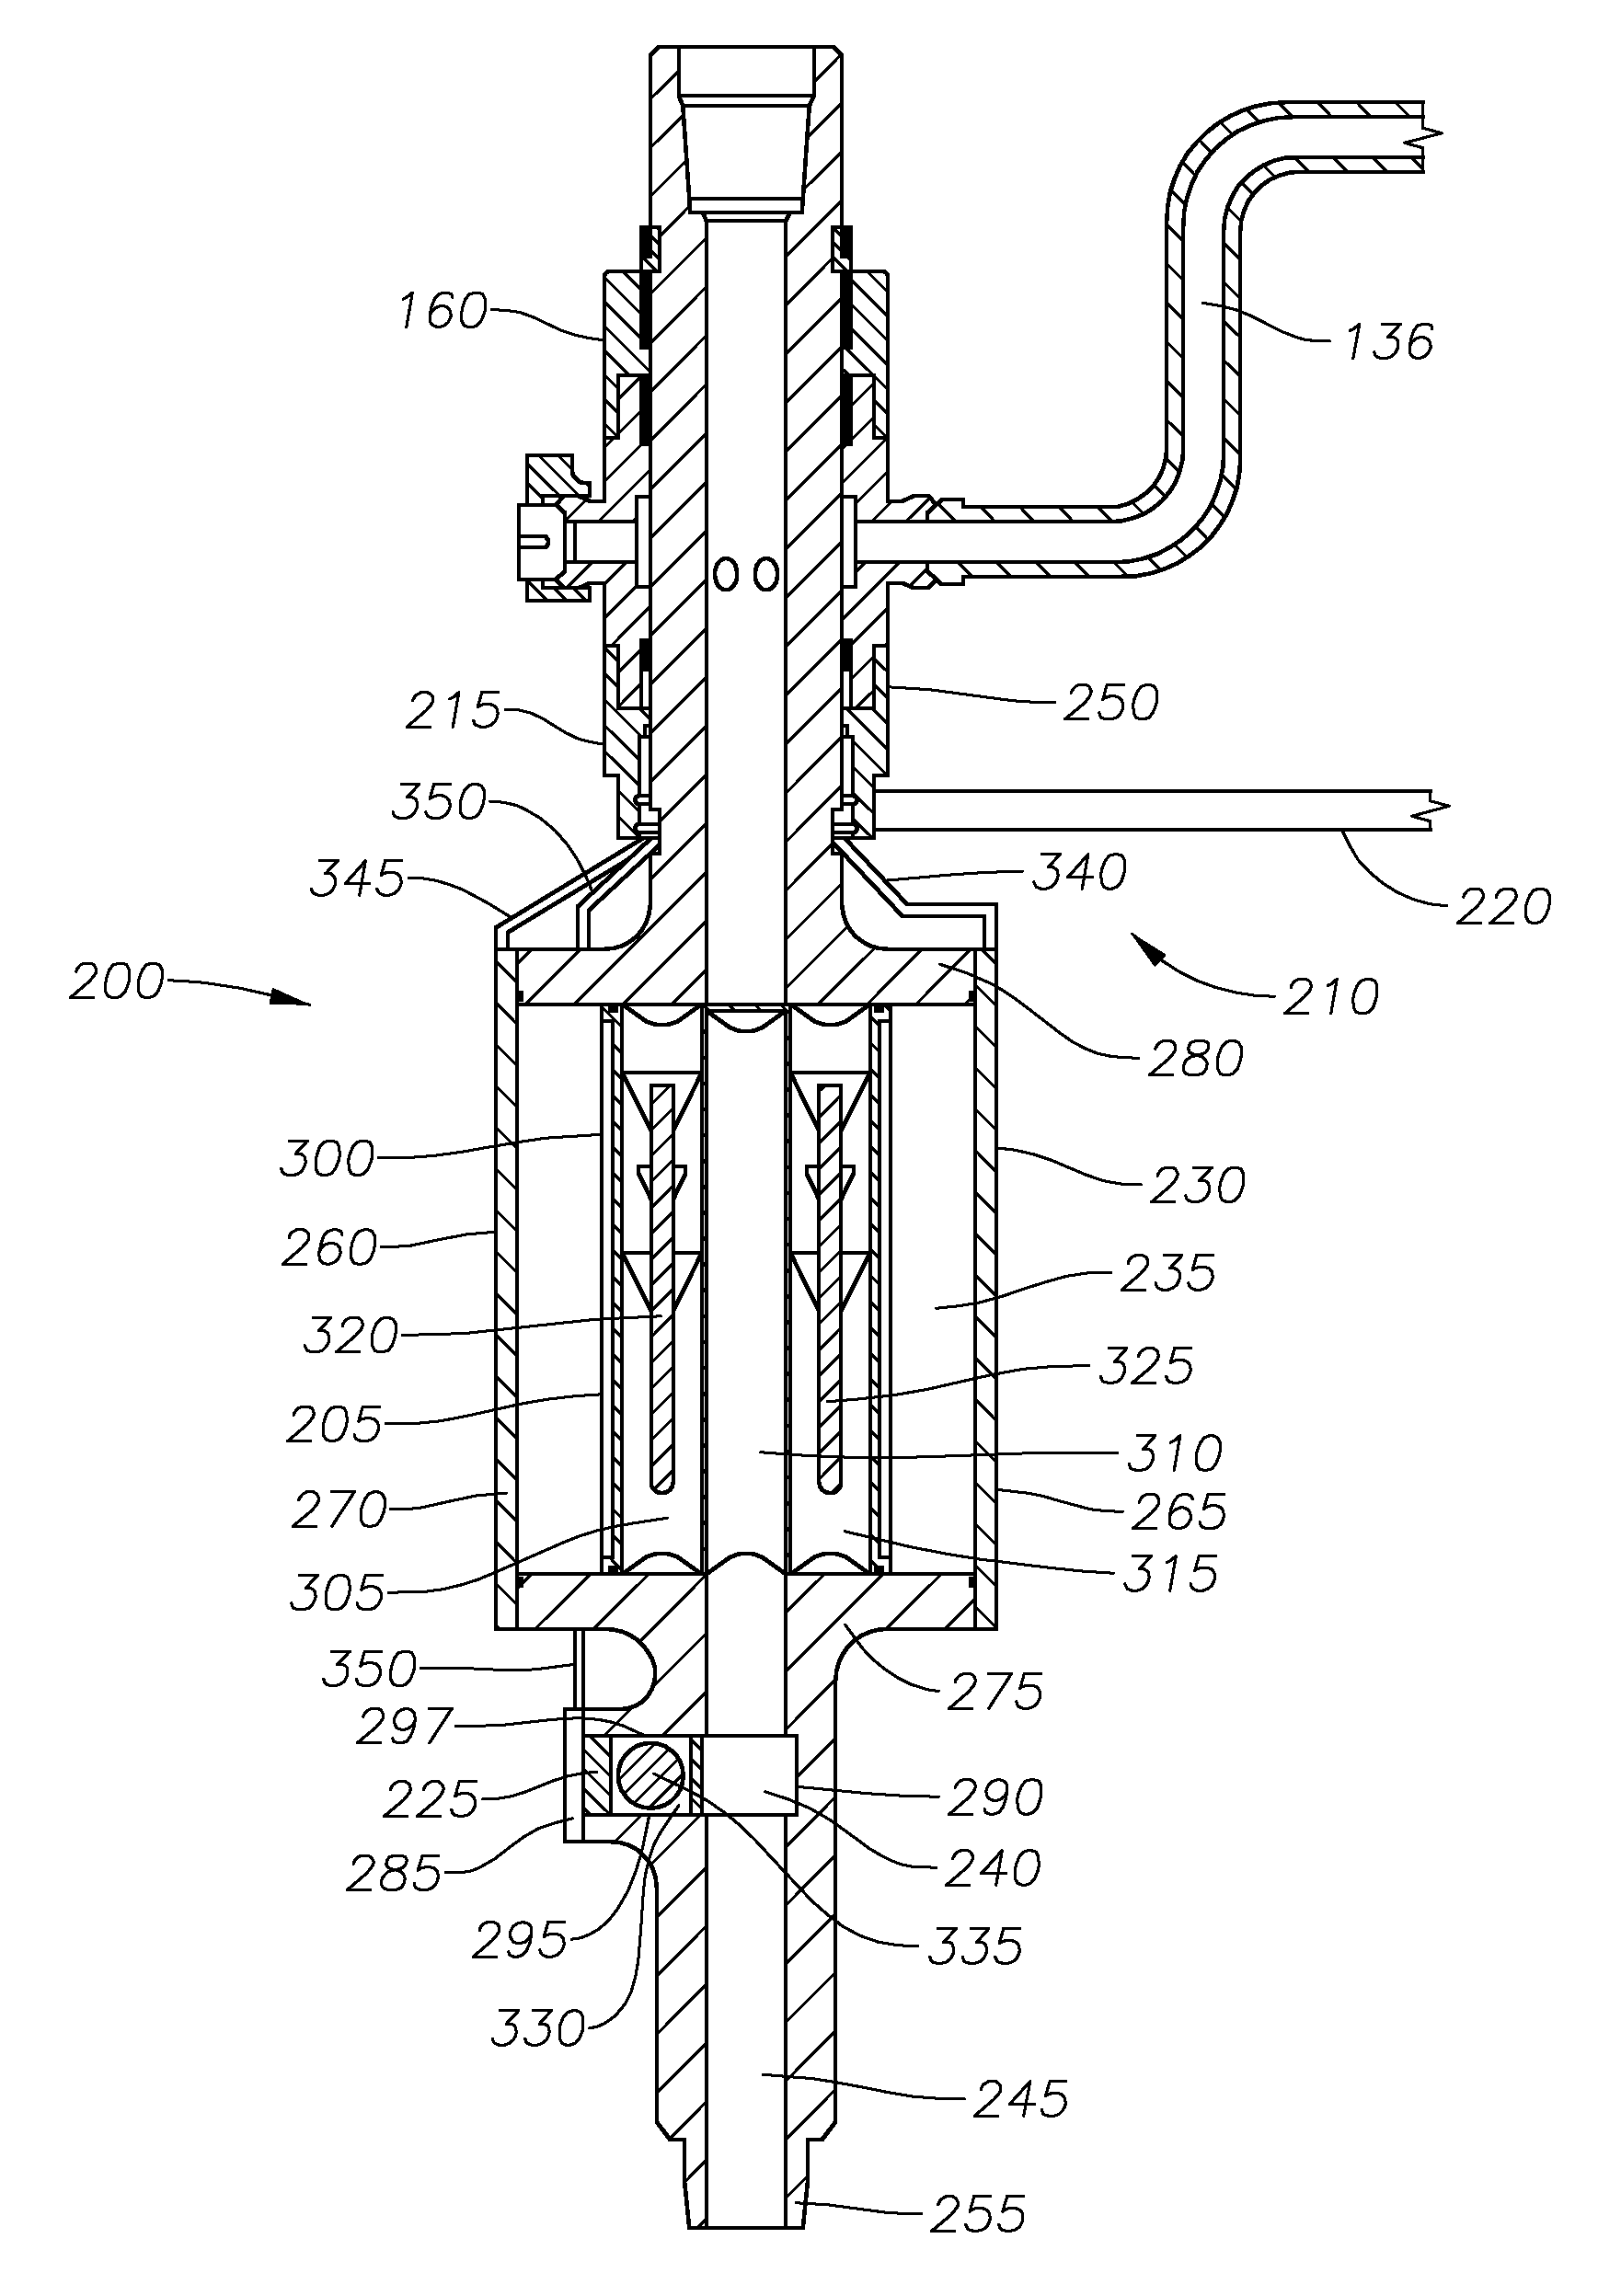 Cementing manifold with canister fed dart and ball release system